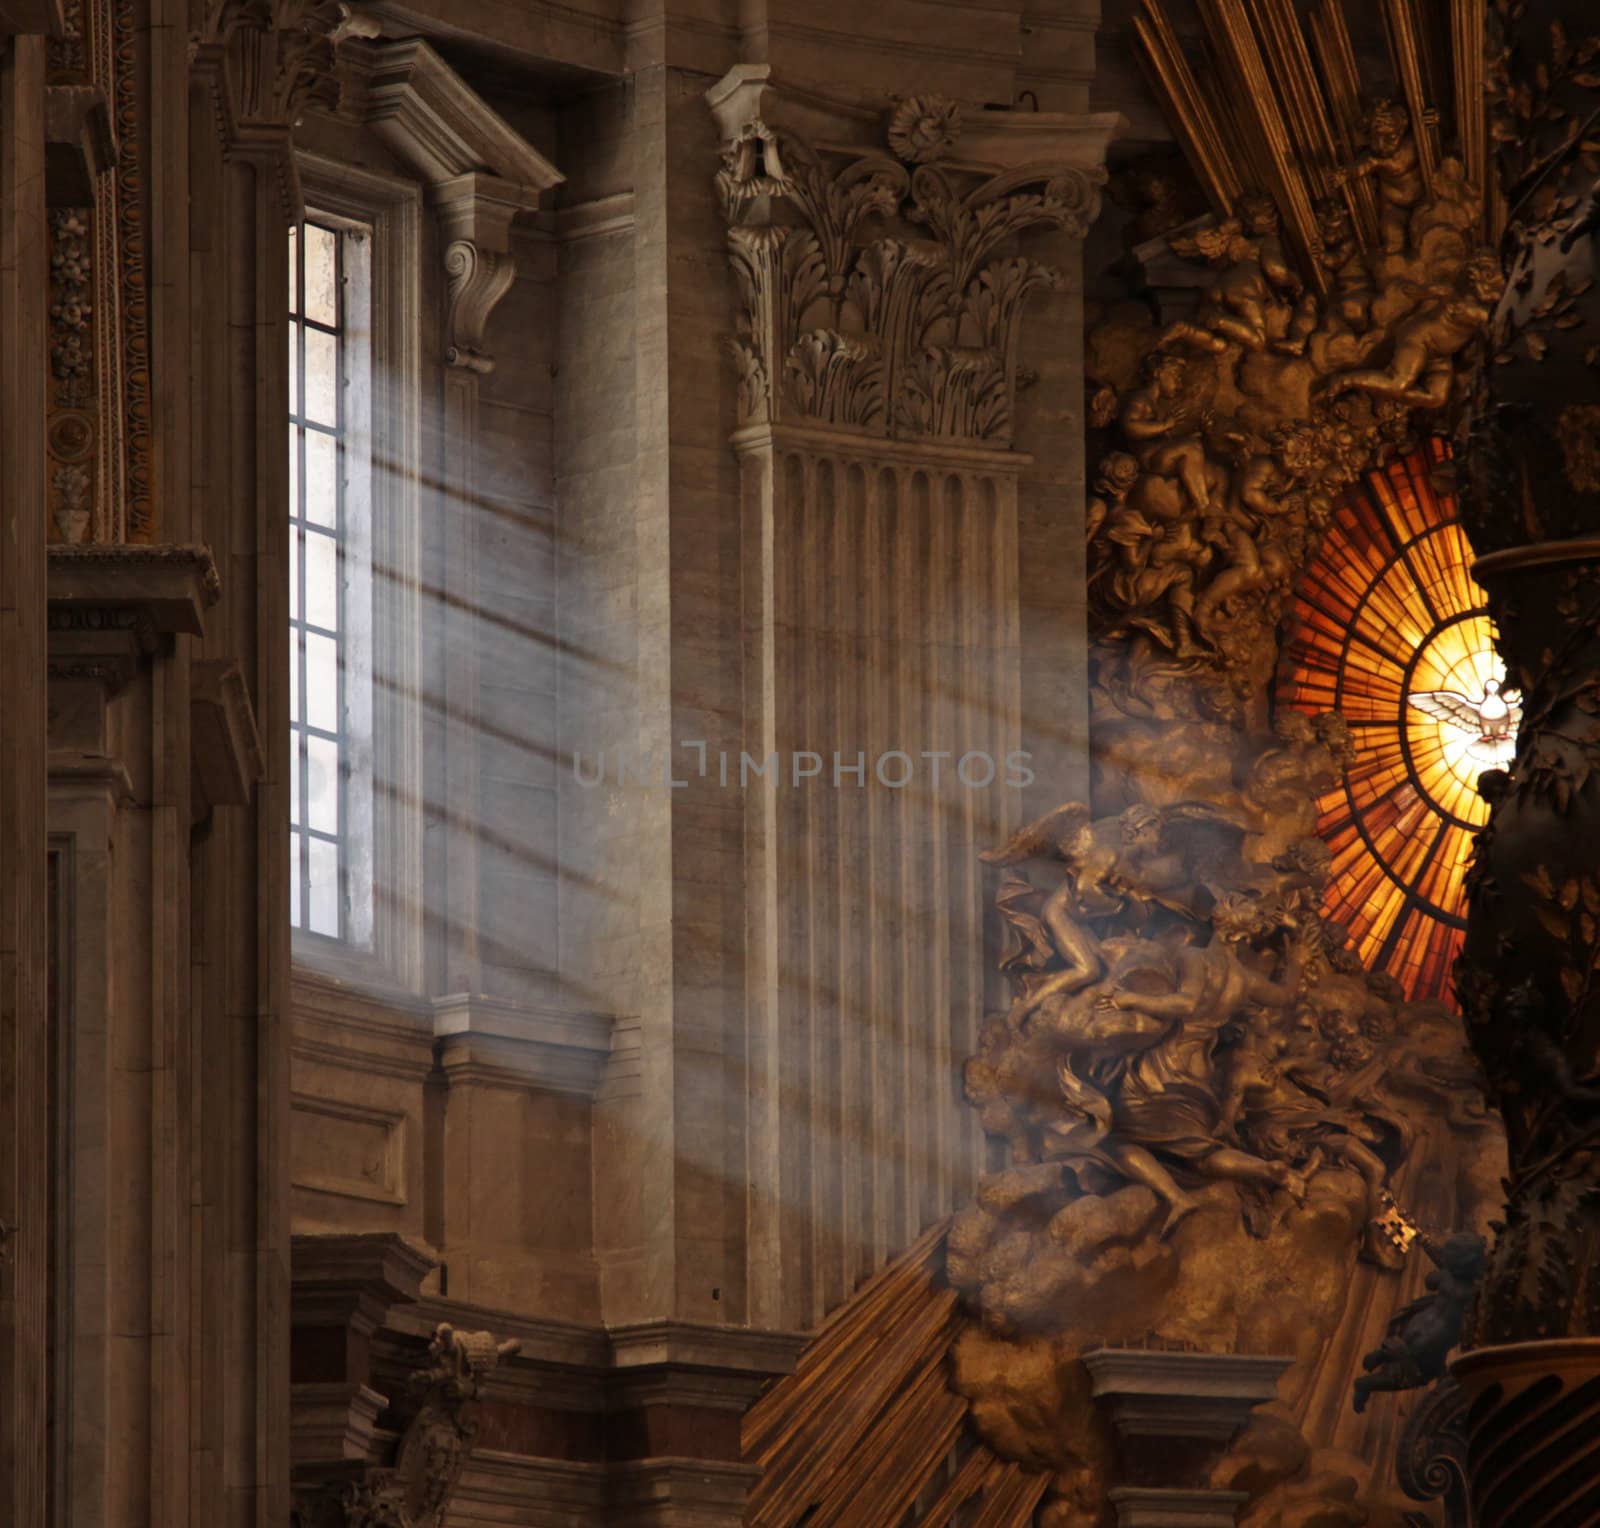 Rays of sunlight shine in the window onto the main altar of St. Peter's Basilica, in Rome, Italy.